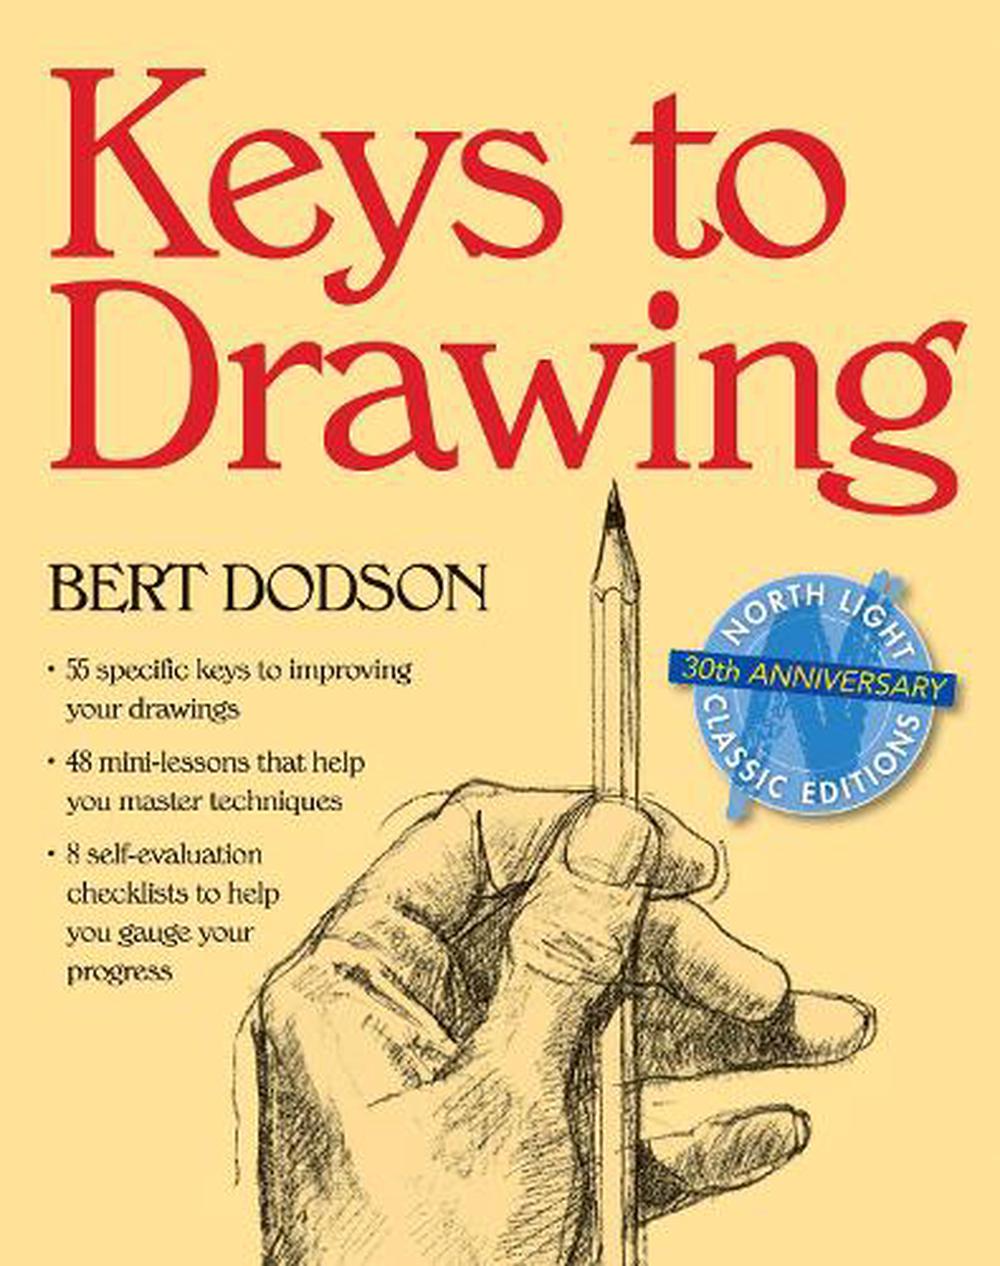 Keys to Drawing by Bert Dodson (English) Paperback Book Free Shipping